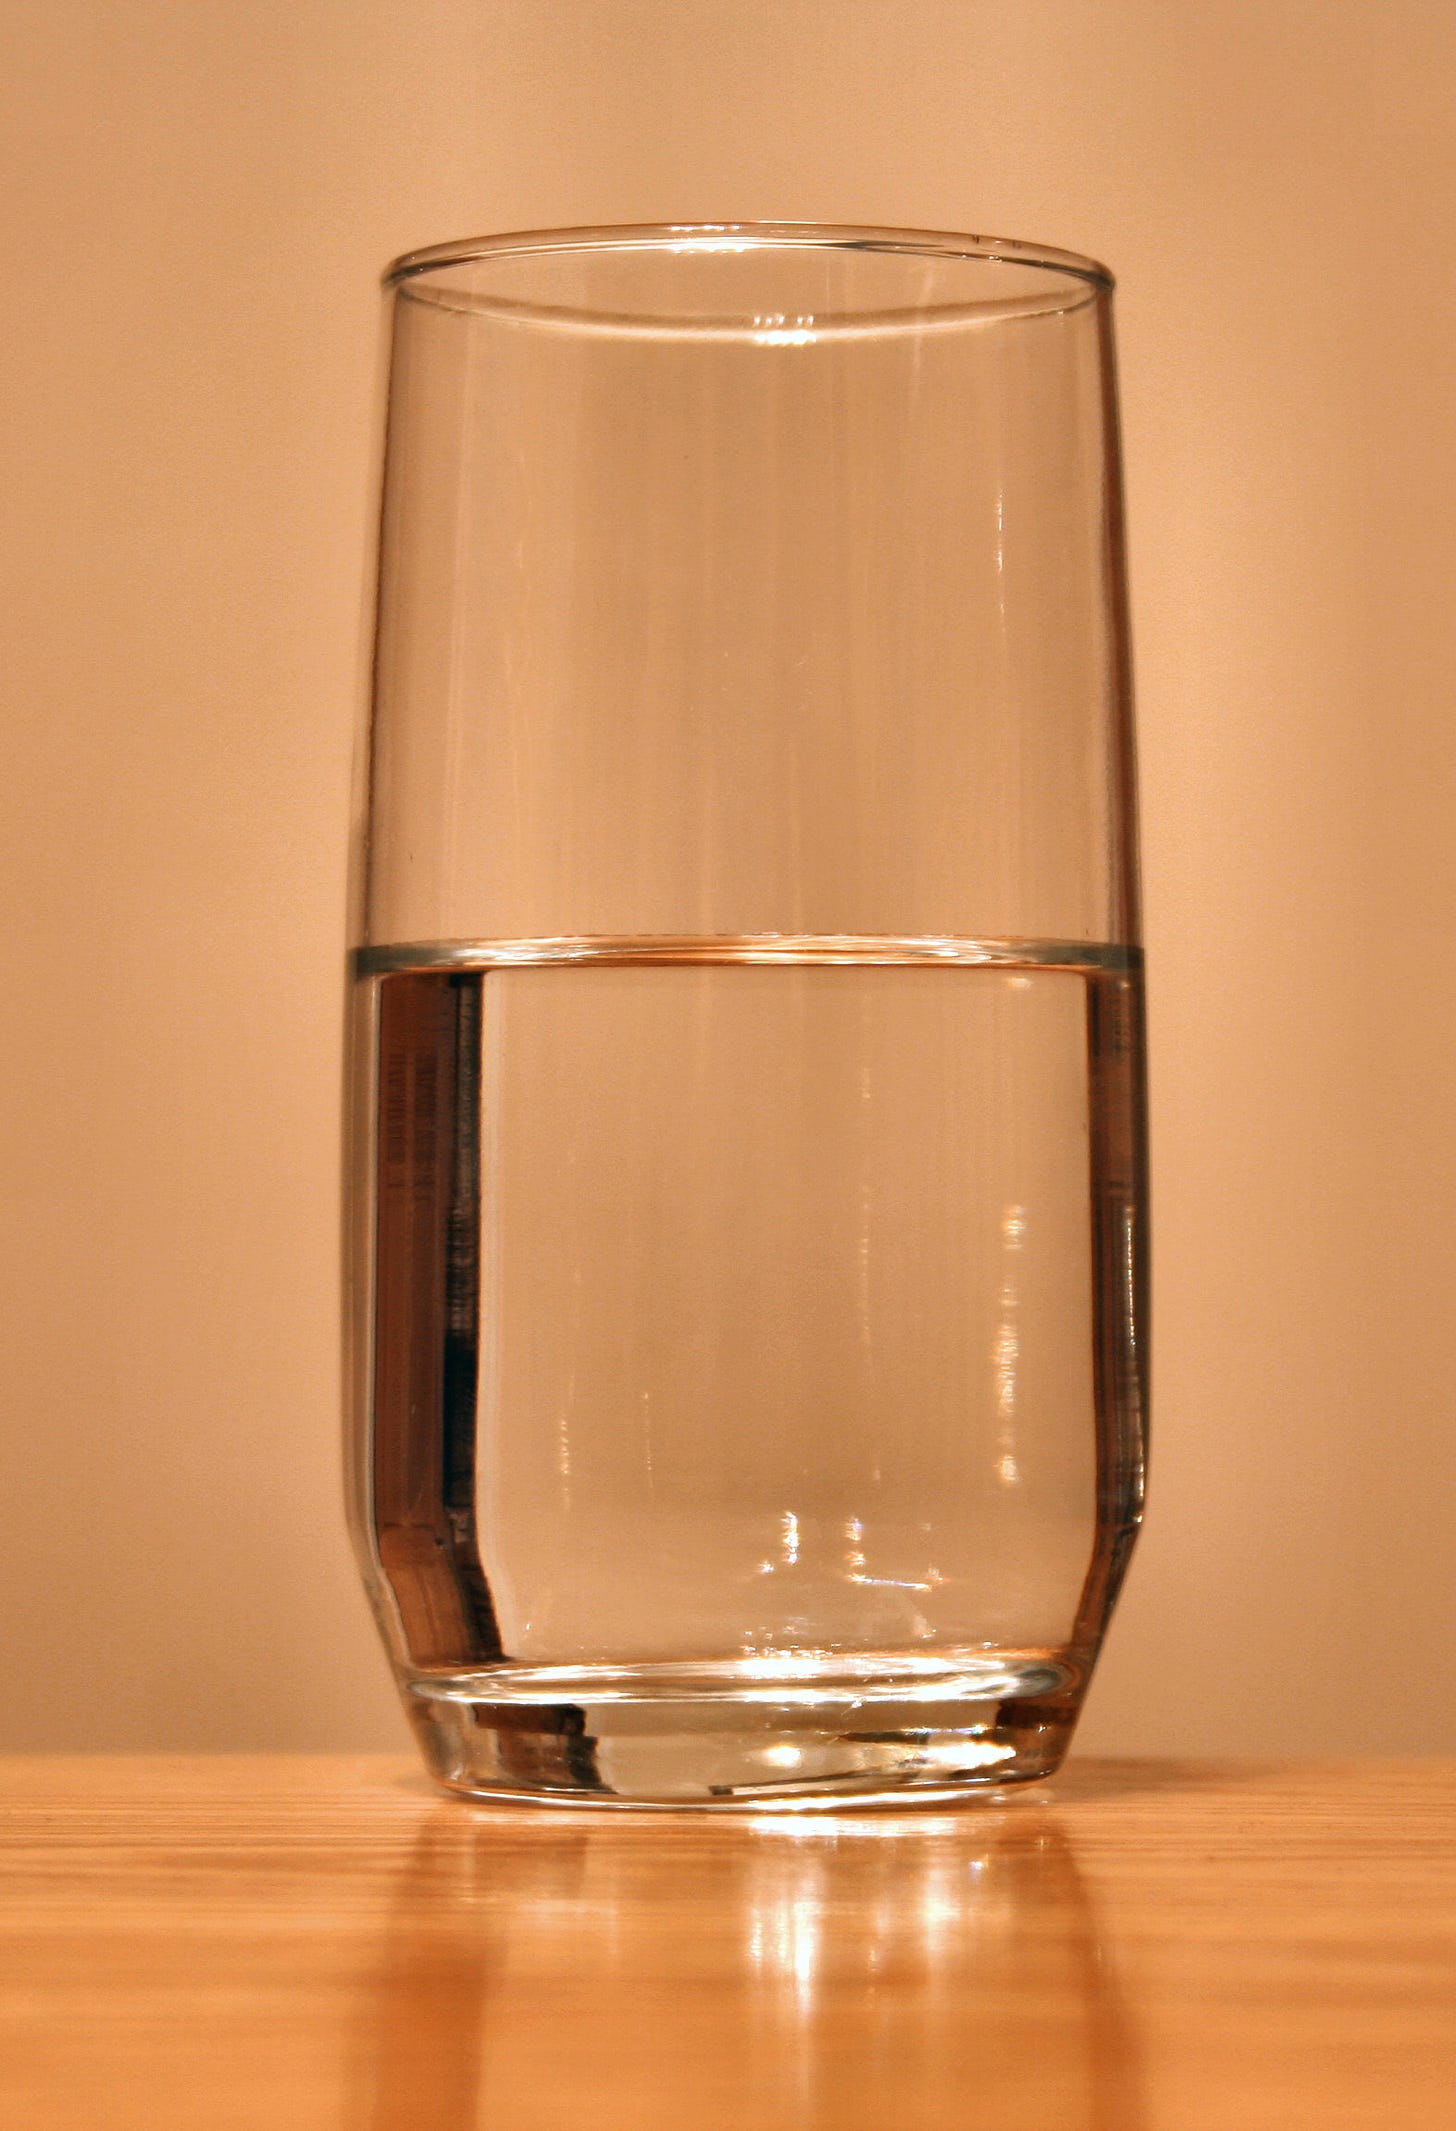 Everyone asks if the glass is half empty or half full, never "I didn't ask for water"